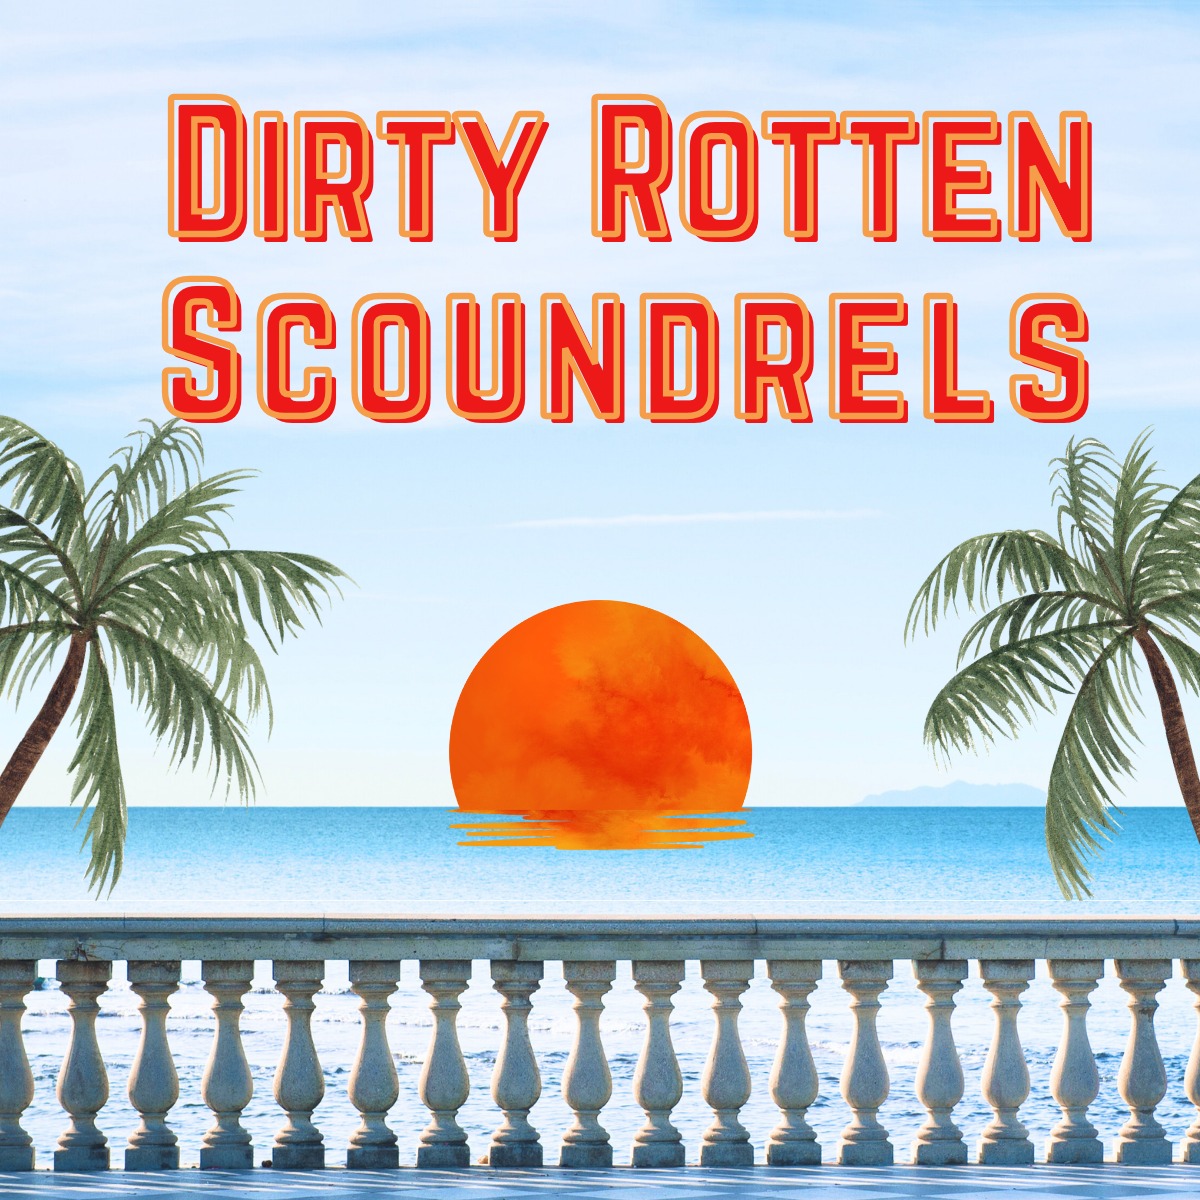 Dirty Rotten Scoundrels by Austin Playhouse